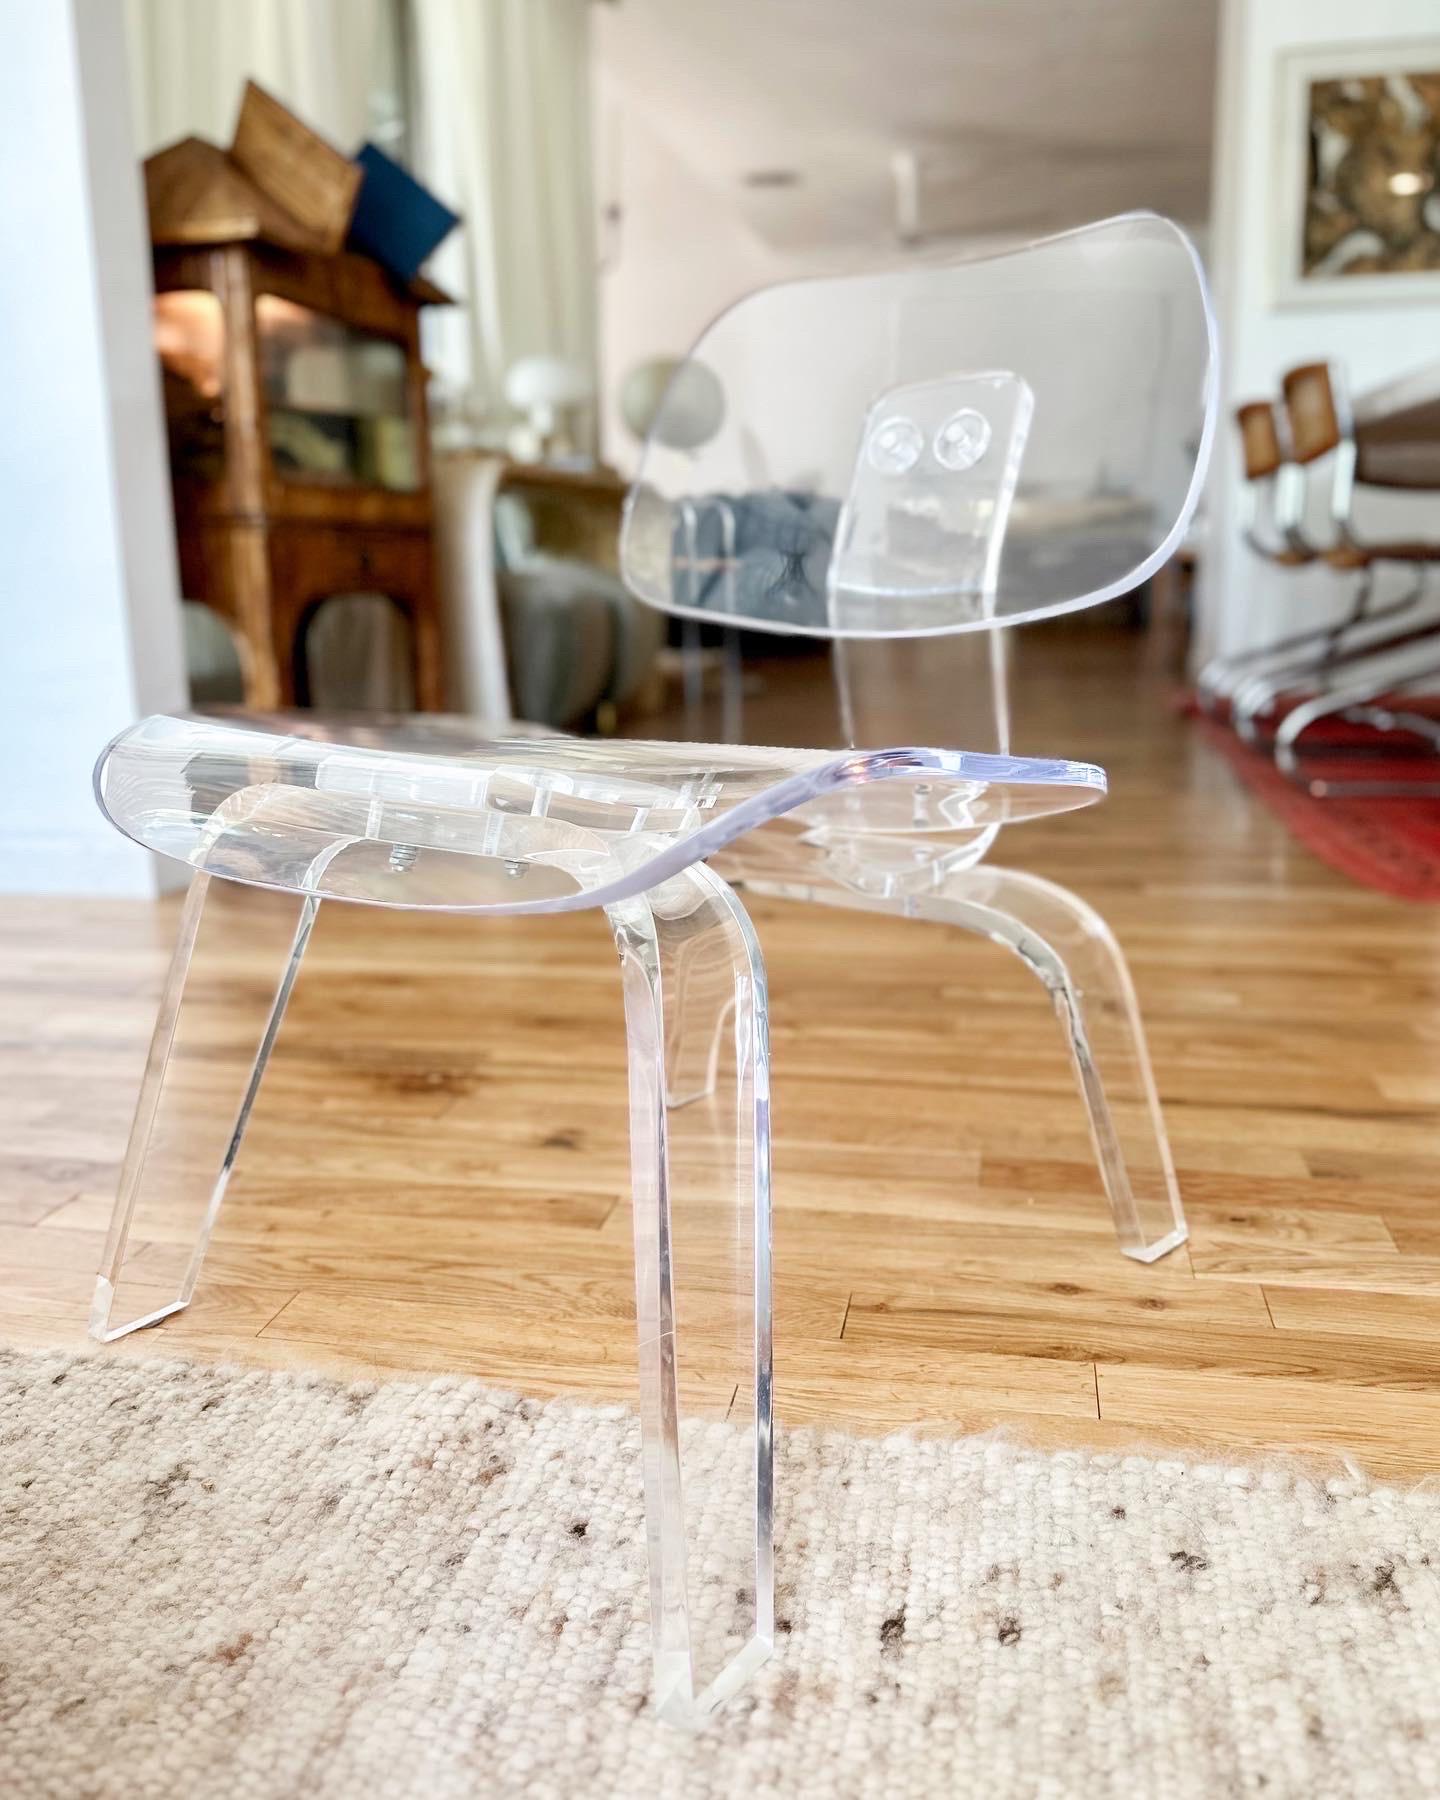 Lucite lounge chair modeled after the iconic Eames LCW plywood chair by Herman Miller, custom-made by acclaimed artist Aaron R. Thomas, c.2000. This rare and collectible piece is a true example of furniture-as-art. Made to order in limited